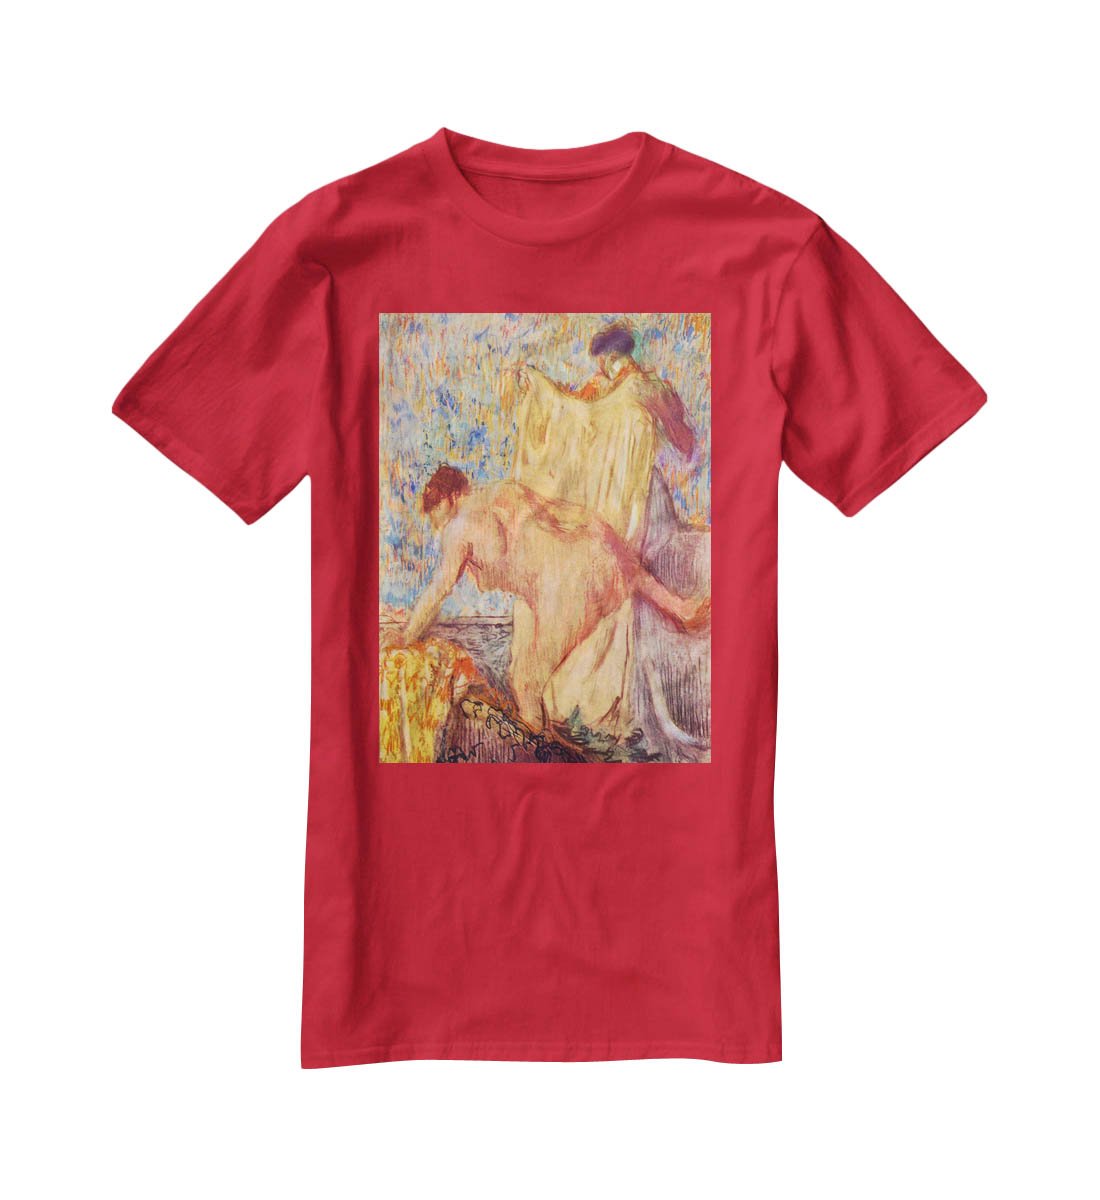 Withdrawing from the bathtub by Degas T-Shirt - Canvas Art Rocks - 4